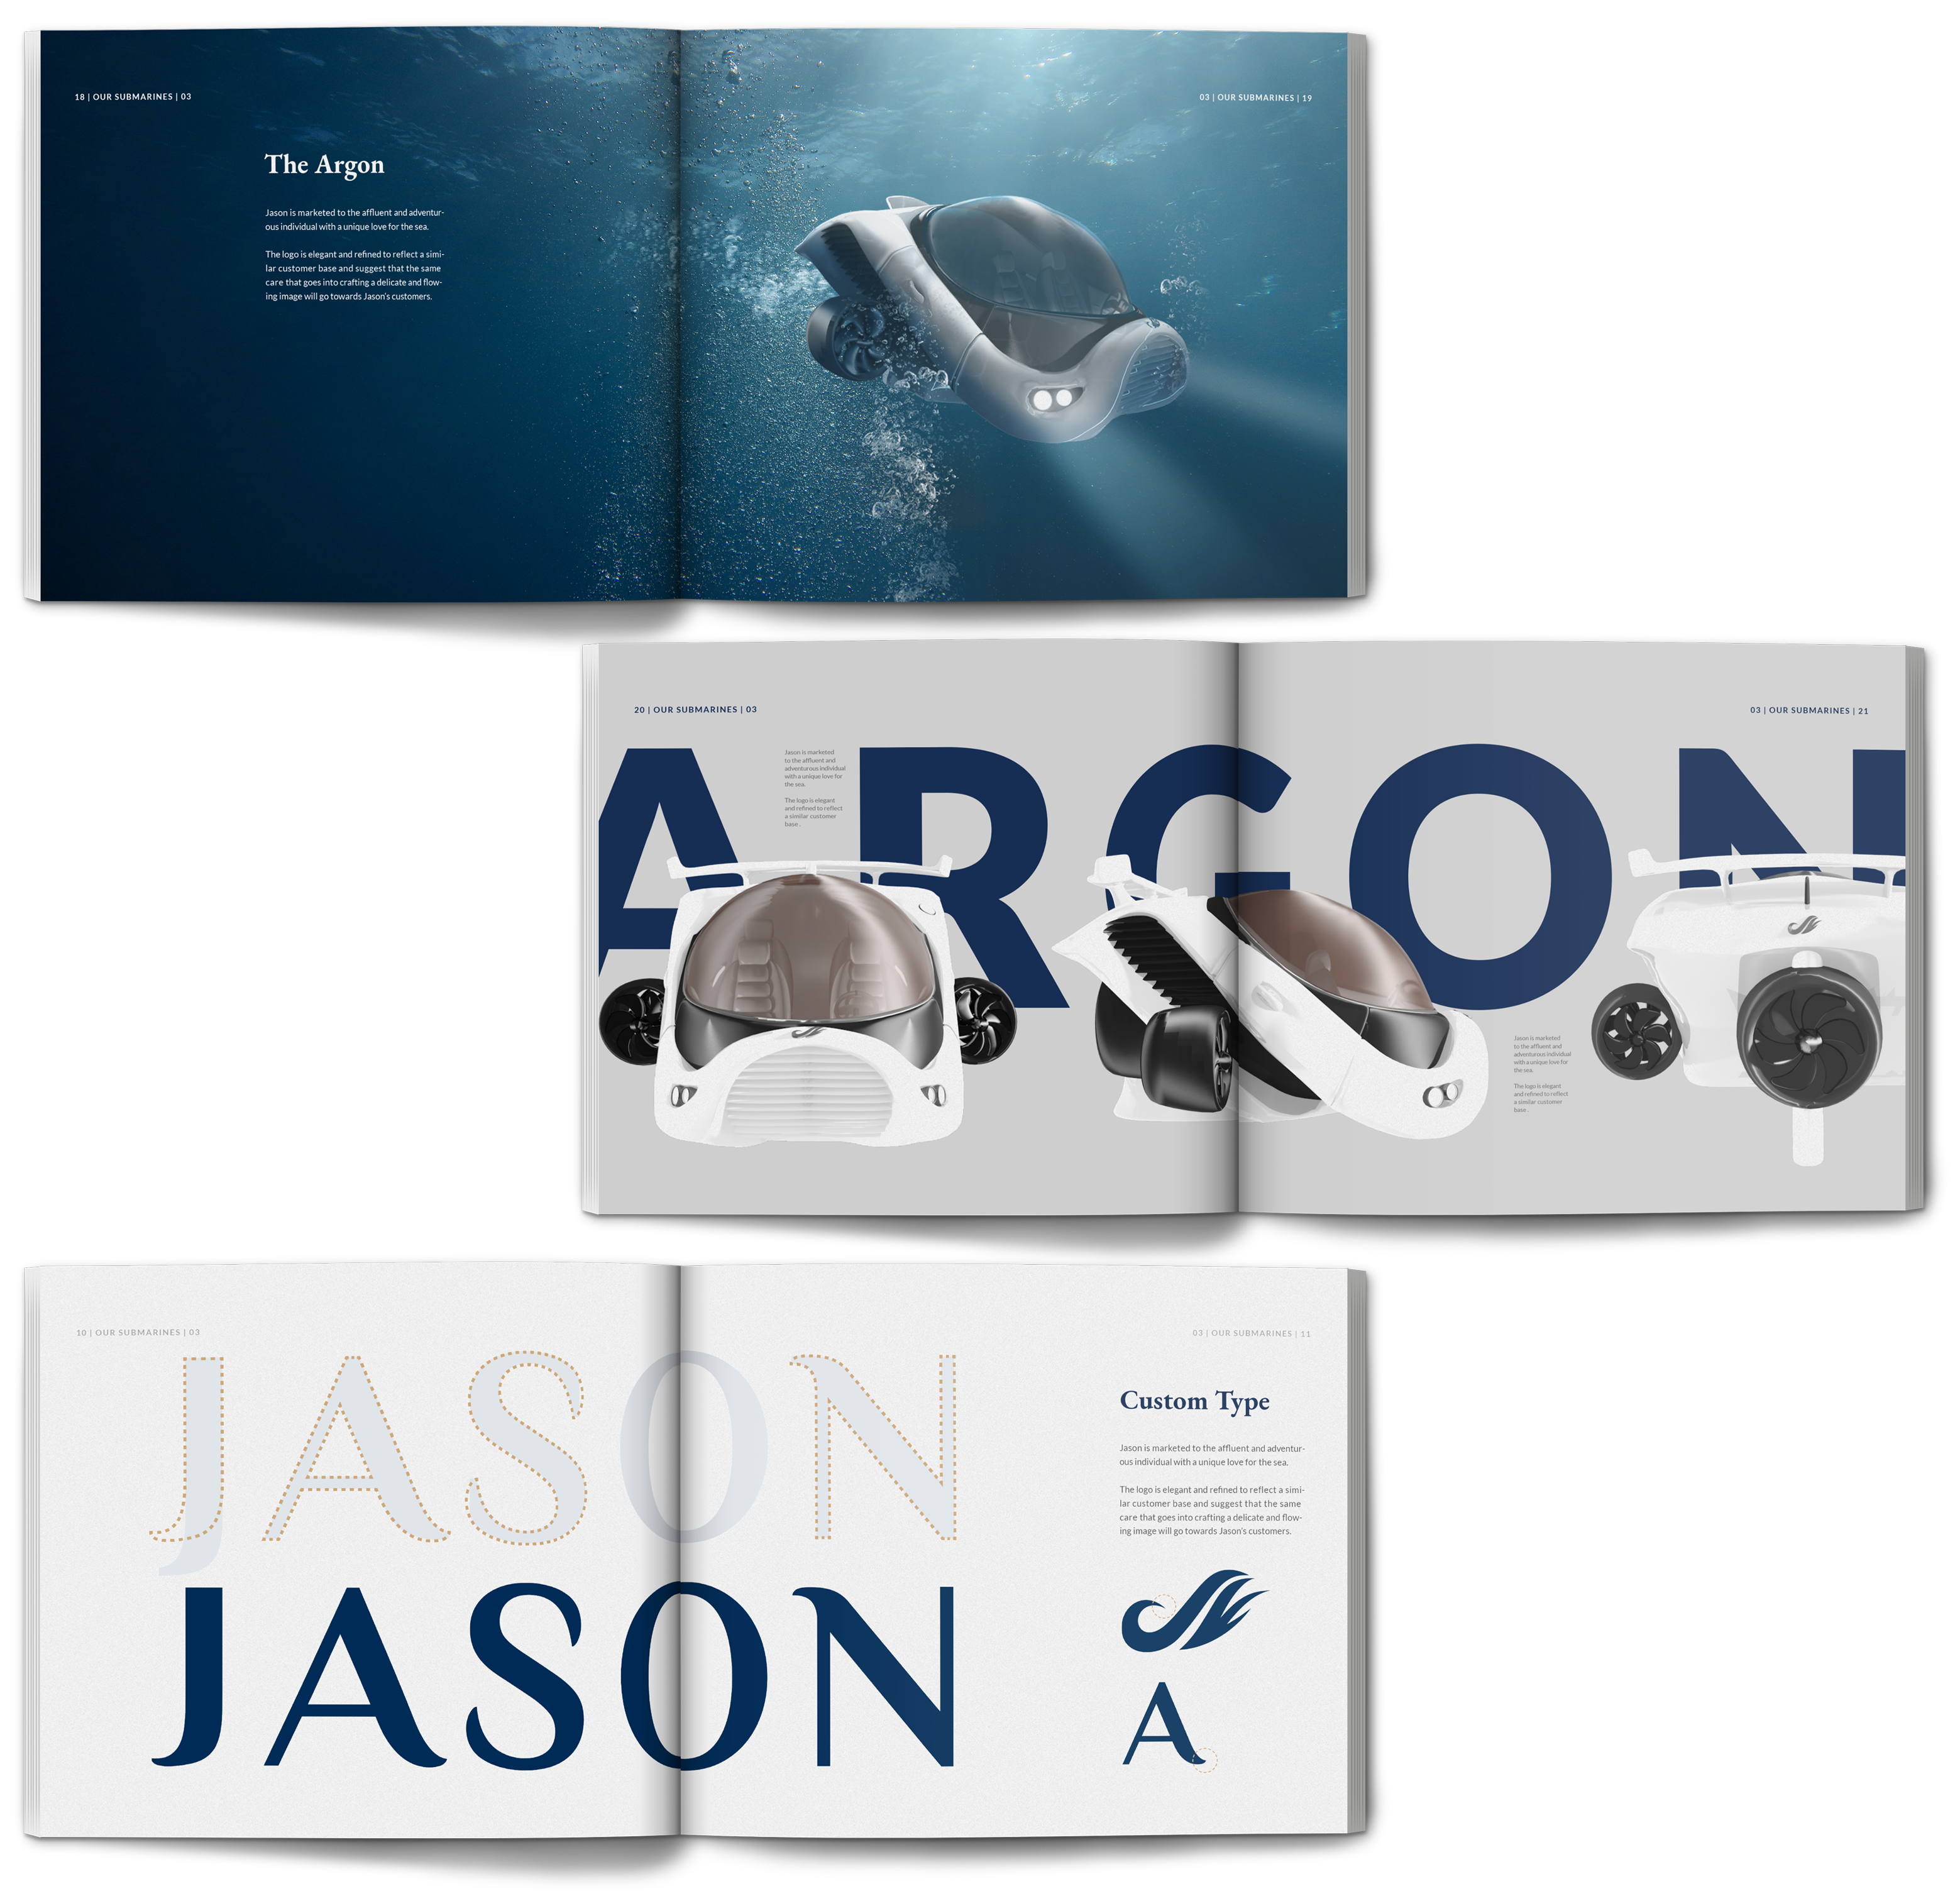 mockups showing several spreads from the Jason brand identity guidelines book